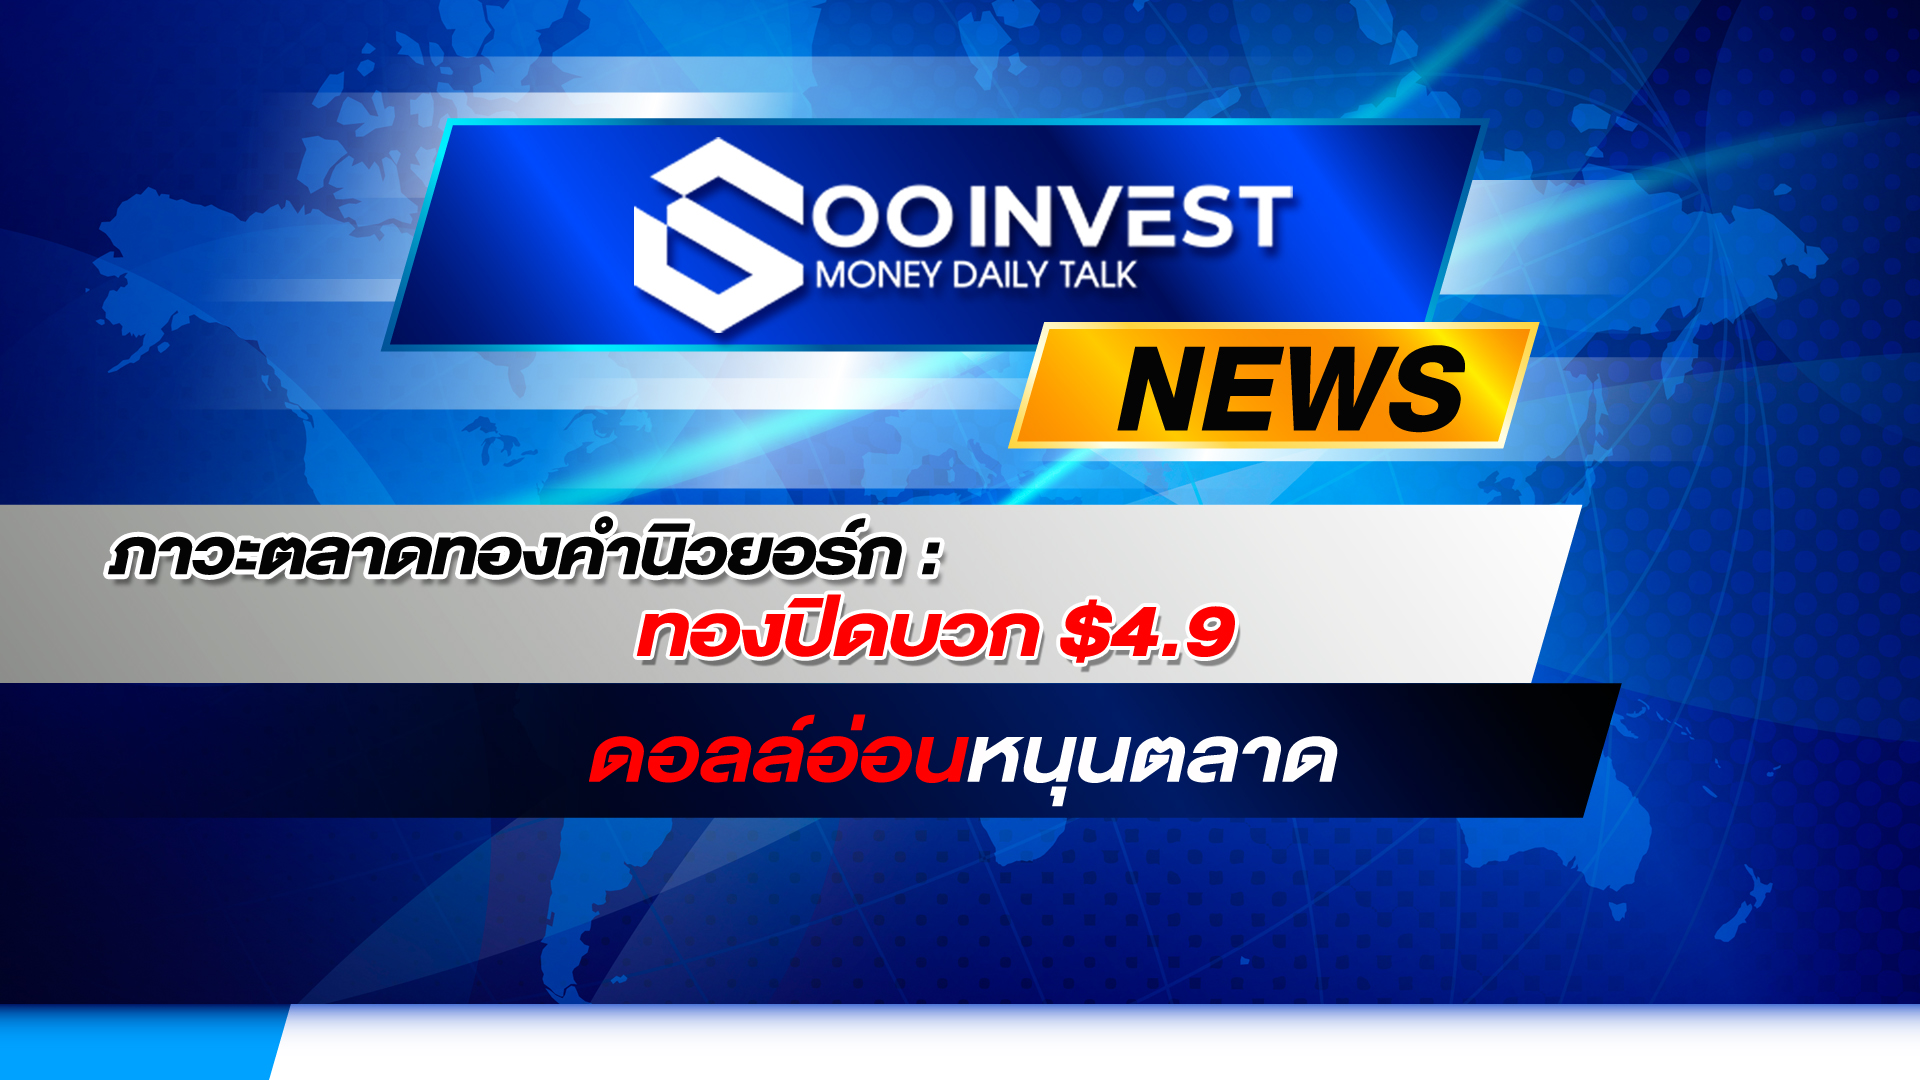 goo invest new 18 may 22